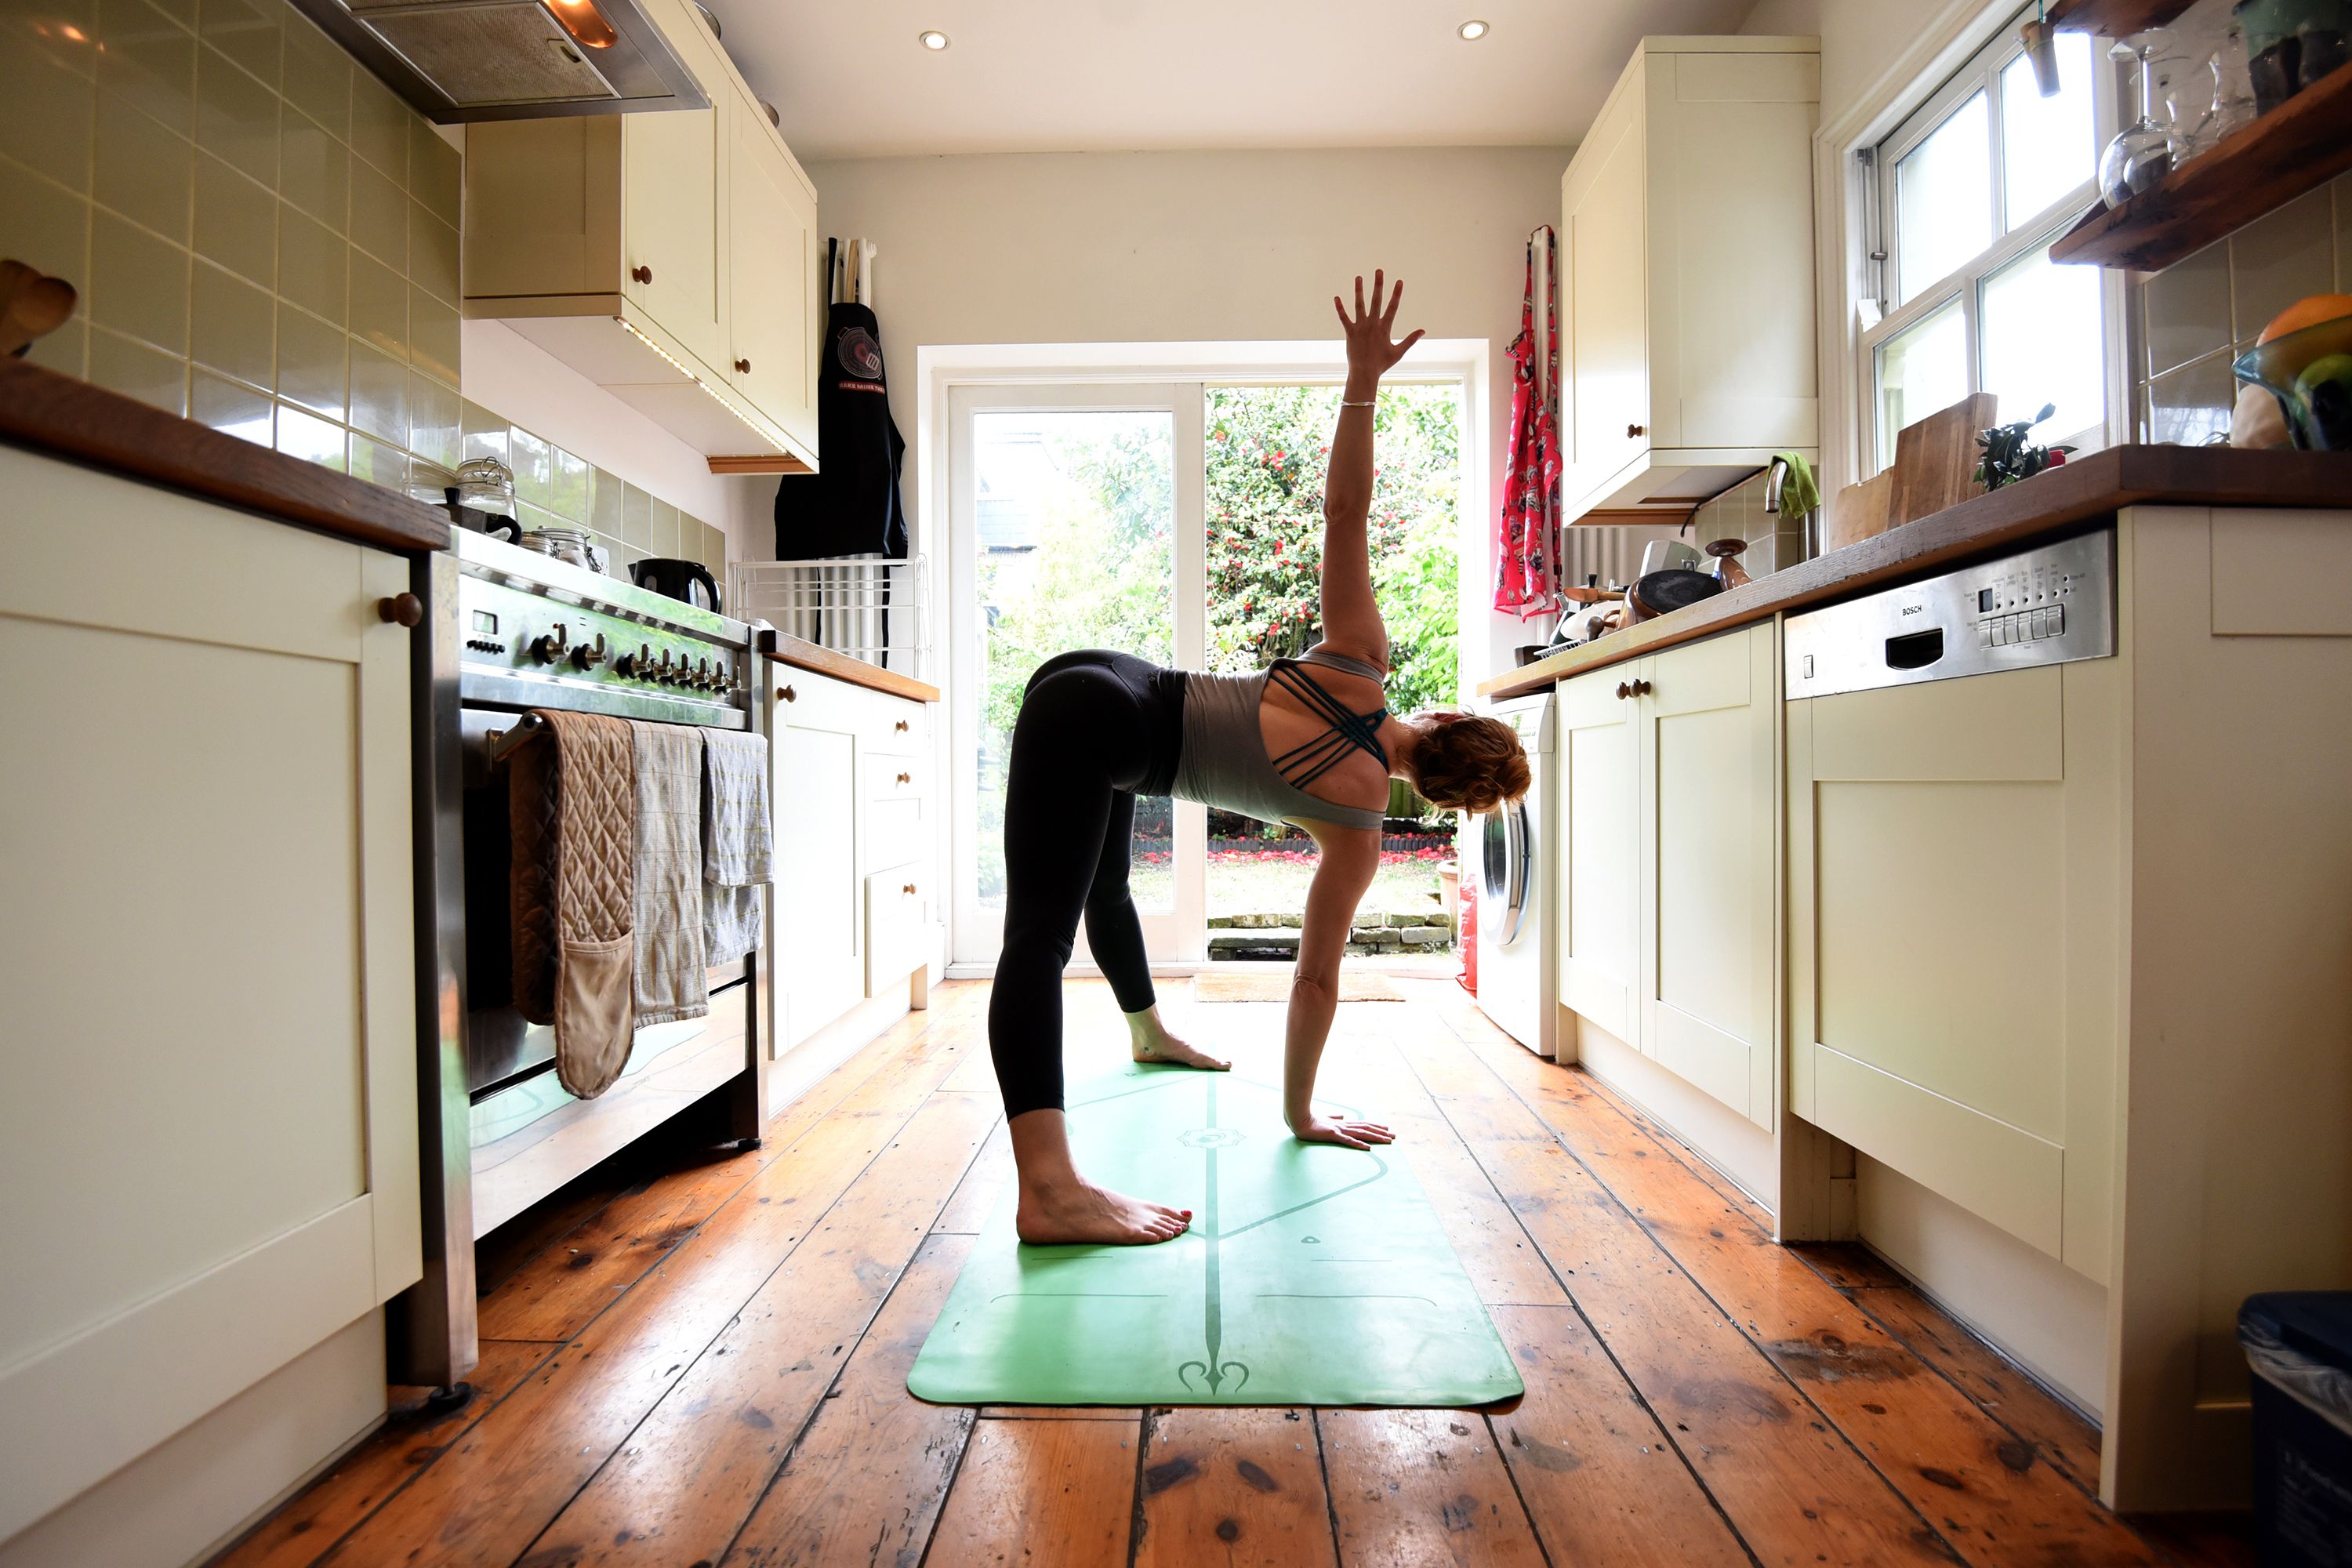 How To Do Hot Yoga At Home 2021 The